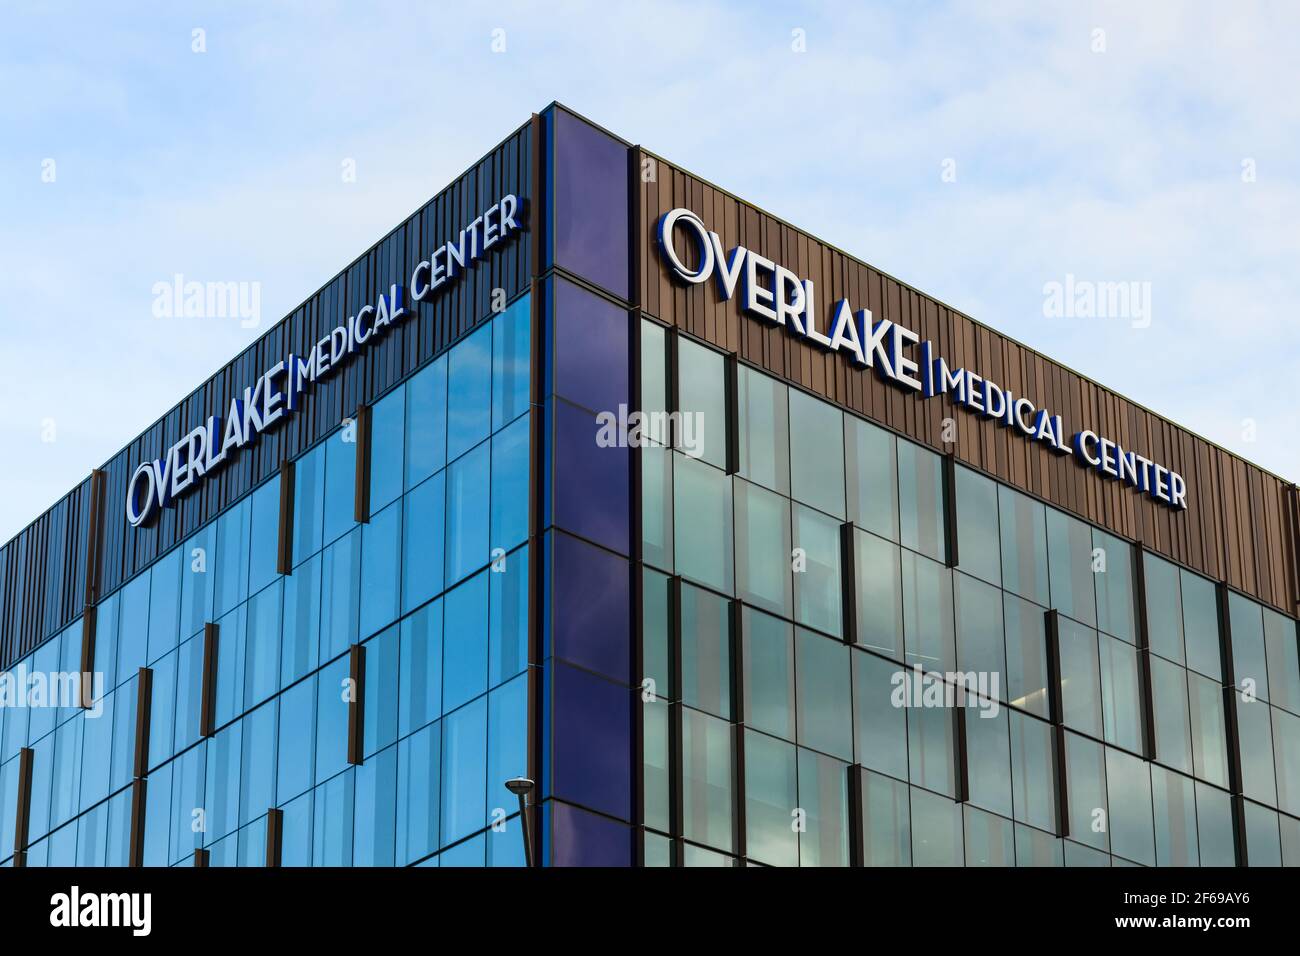 The new tower at Overlake Medical Center in Bellevue, Washington State, USA showing building corner and two logos Stock Photo